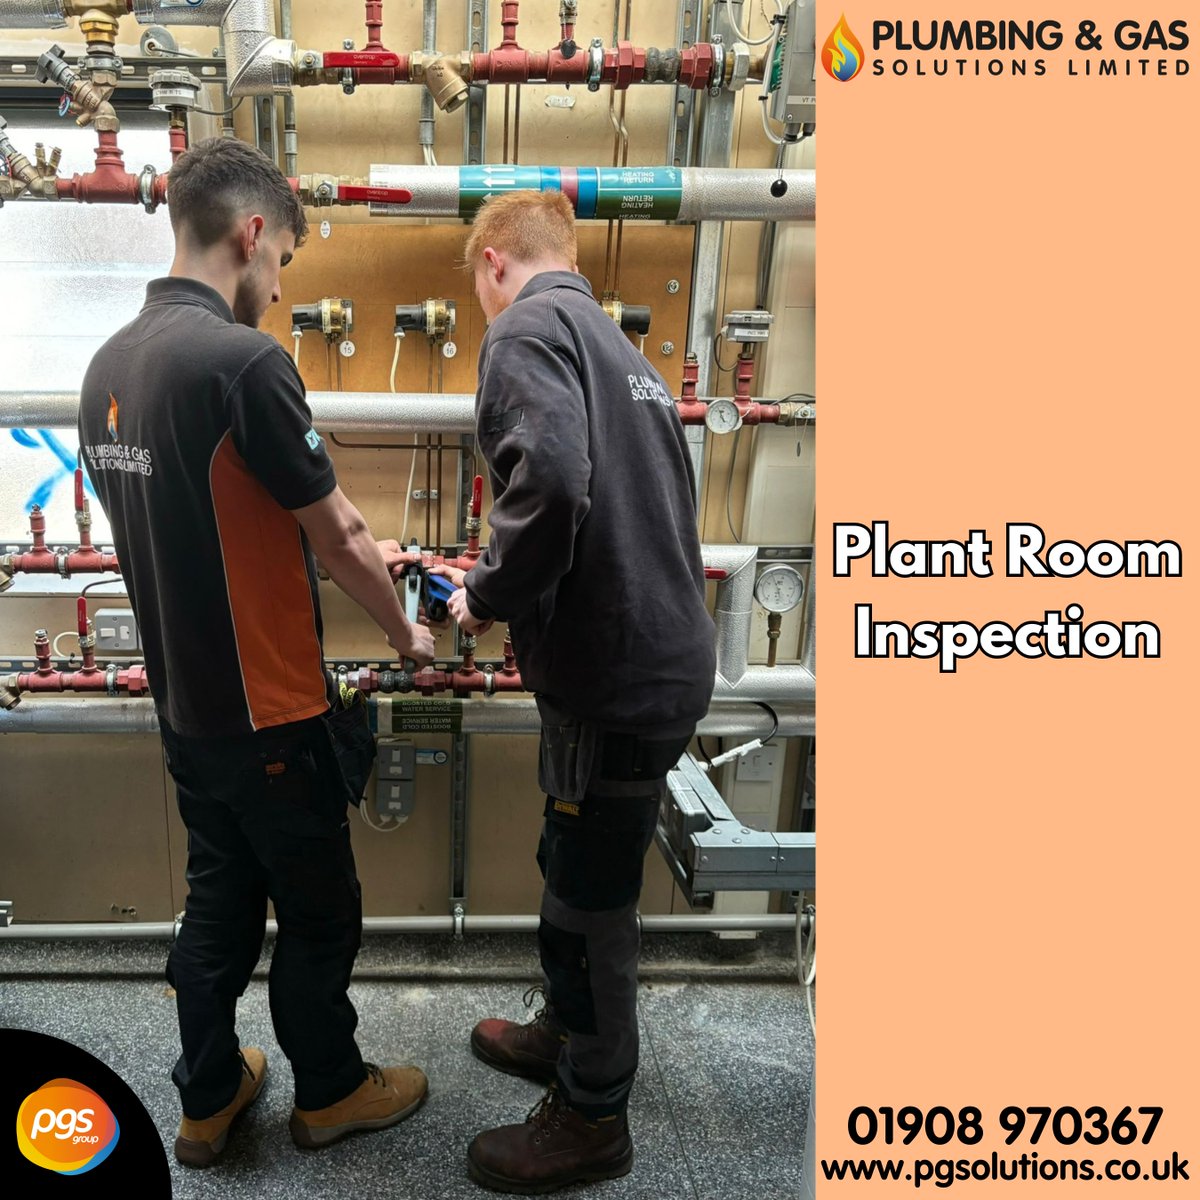 We maintain excellent performance for our clients through regular inspections. Our commitment to regular site checks guarantees your plant rooms to remain healthy. In this case, our client had a leak in their plant room so our engineers made sure it was fixed! 01908 970367 📞